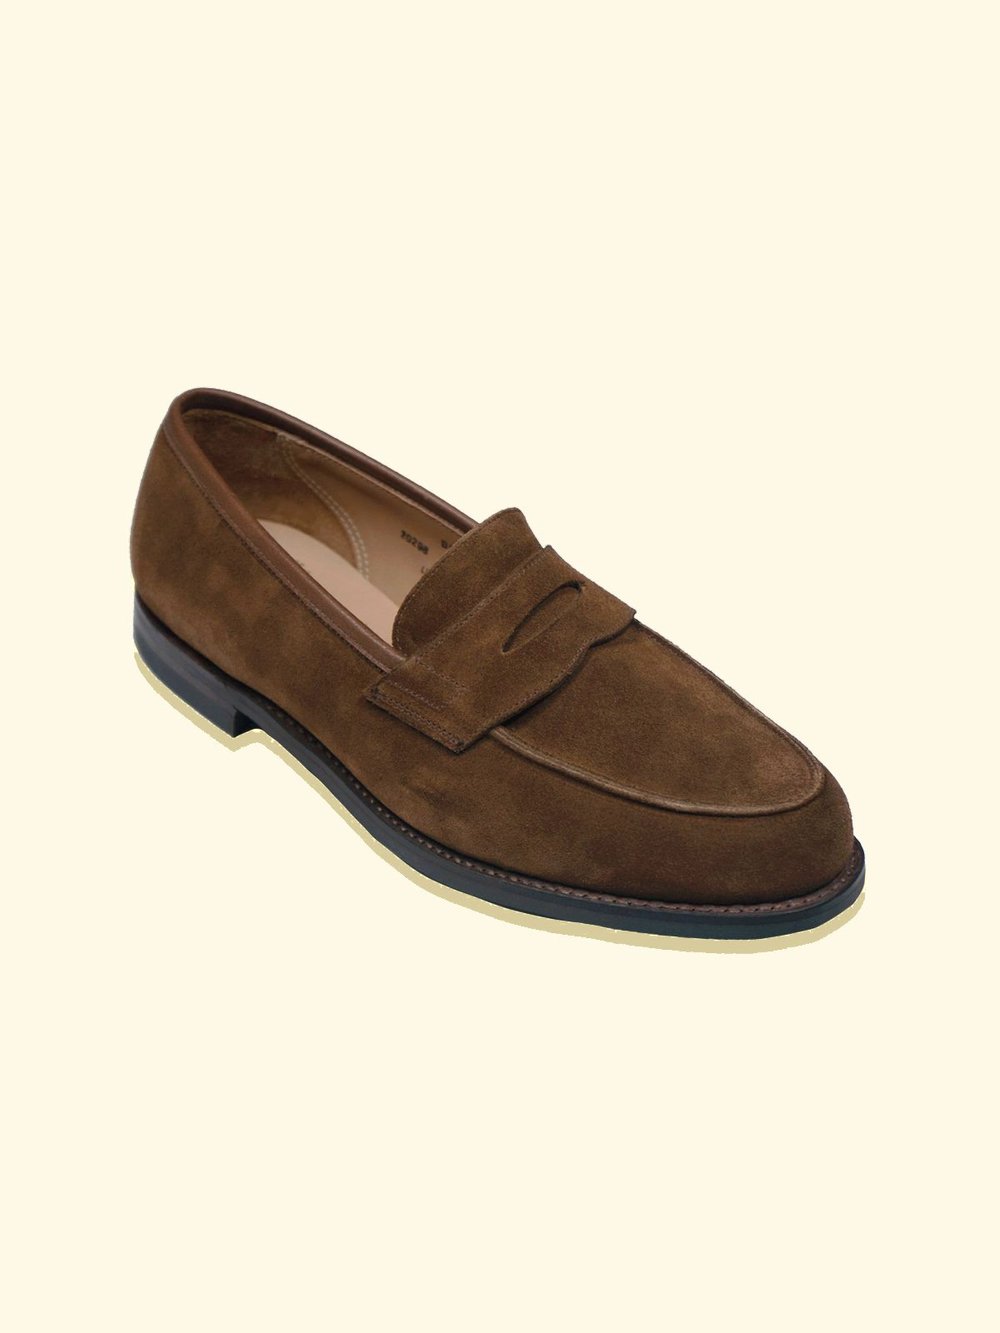 Bodley Penny Loafers by Crockett & Jones for The Anthology - Snuff Suede